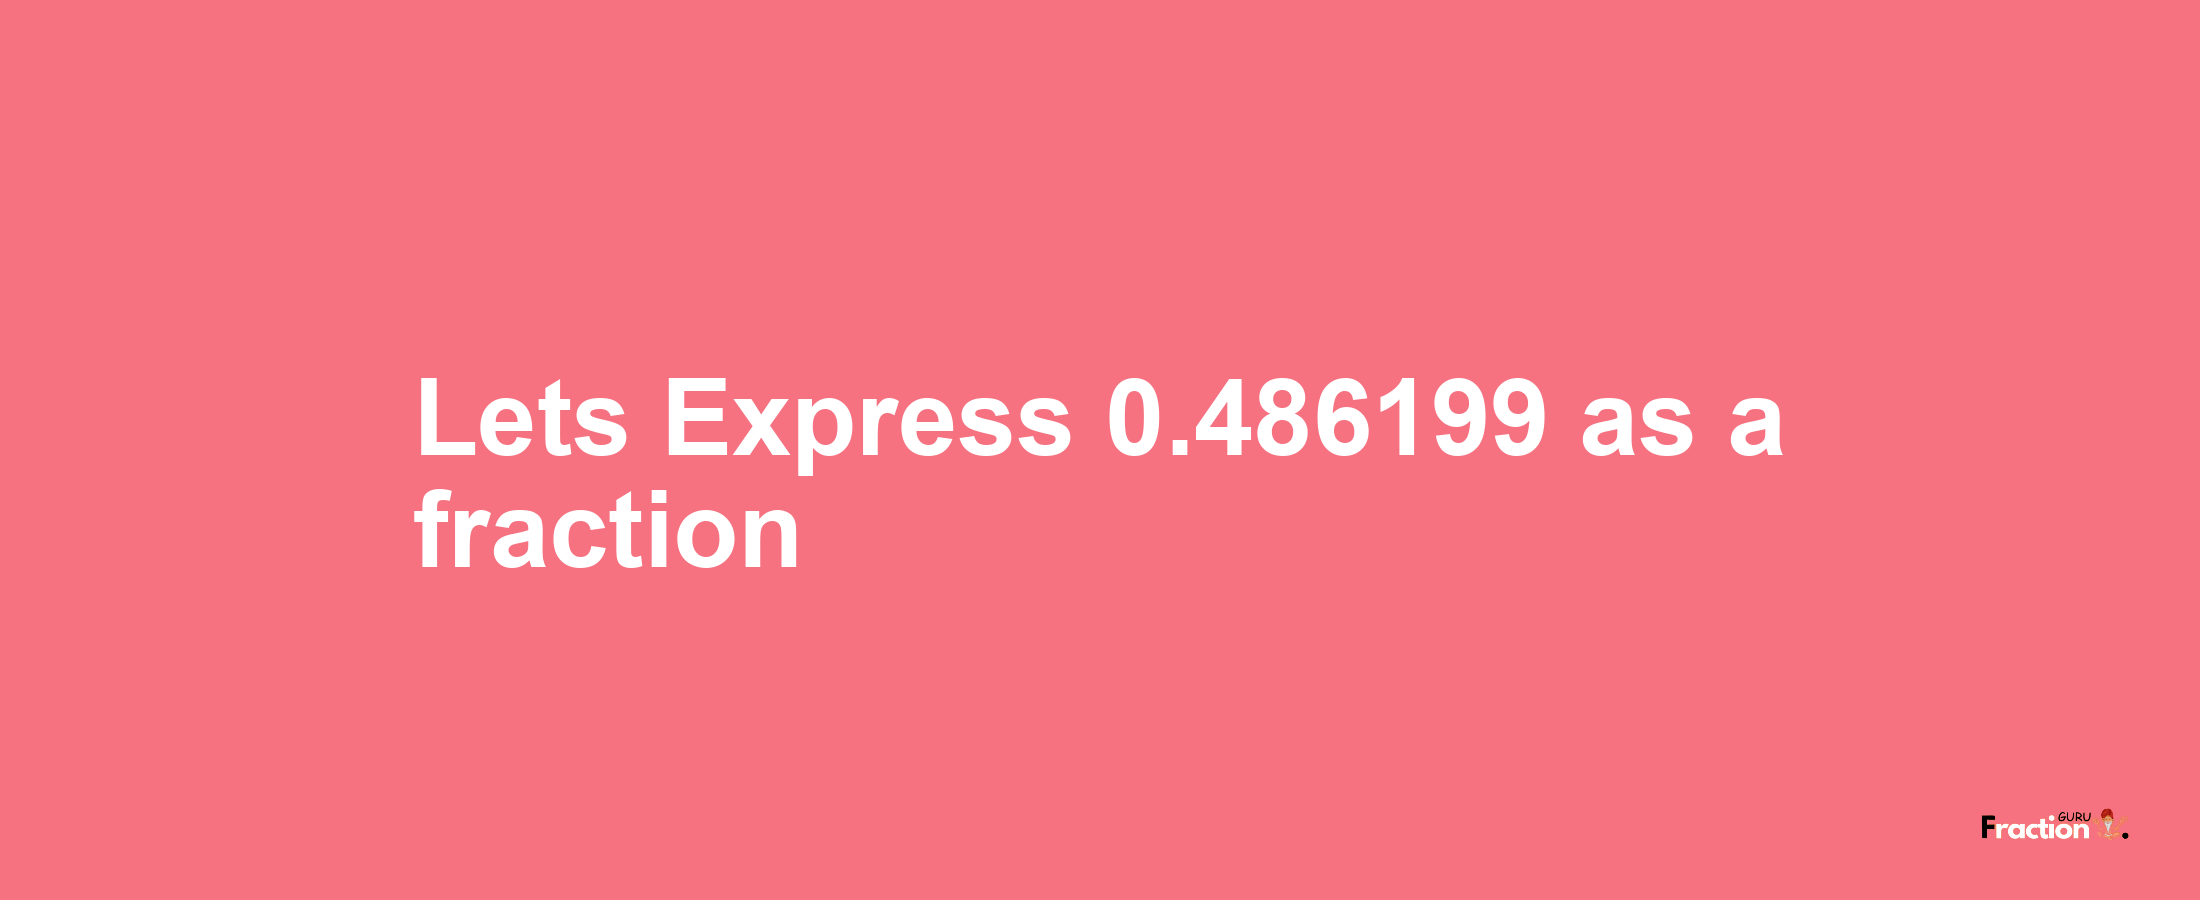 Lets Express 0.486199 as afraction